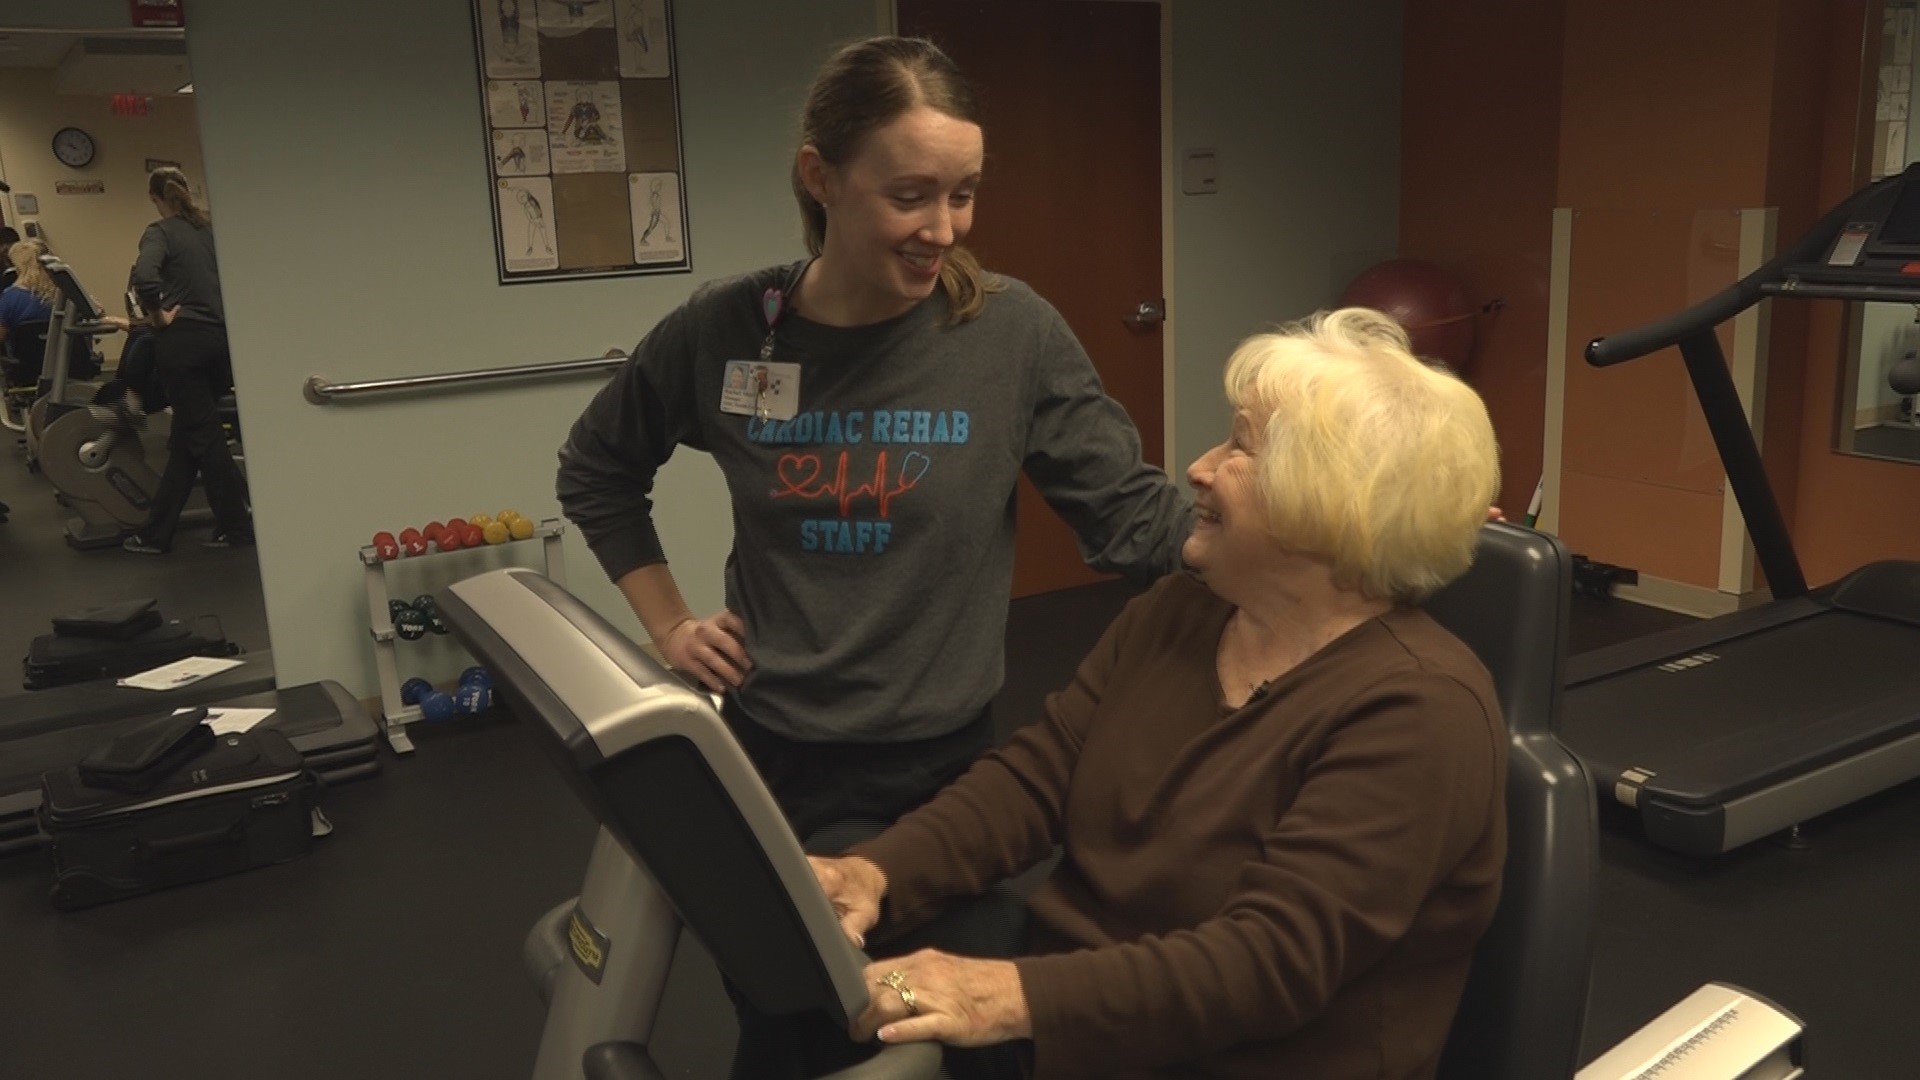 Houston Healthcare's Cardiac Rehab program gets heart attack survivors back on their feet and encourages them to change their lifestyles